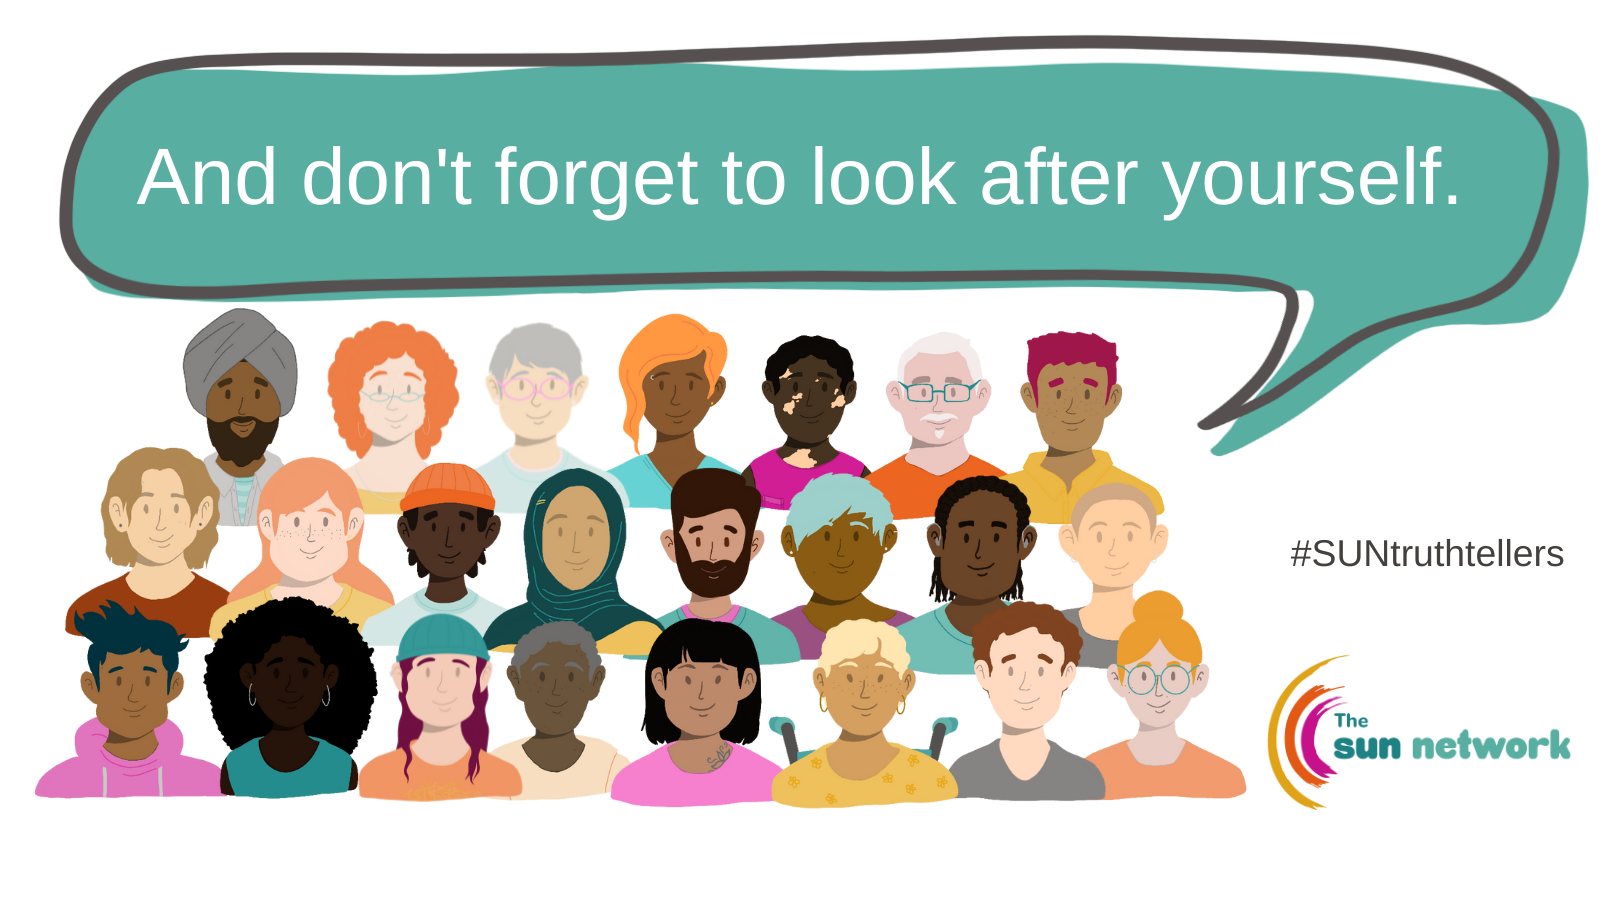 Eating Disorders Group Image with a speech bubble saying \'And don\'t forget to look after yourself\'.